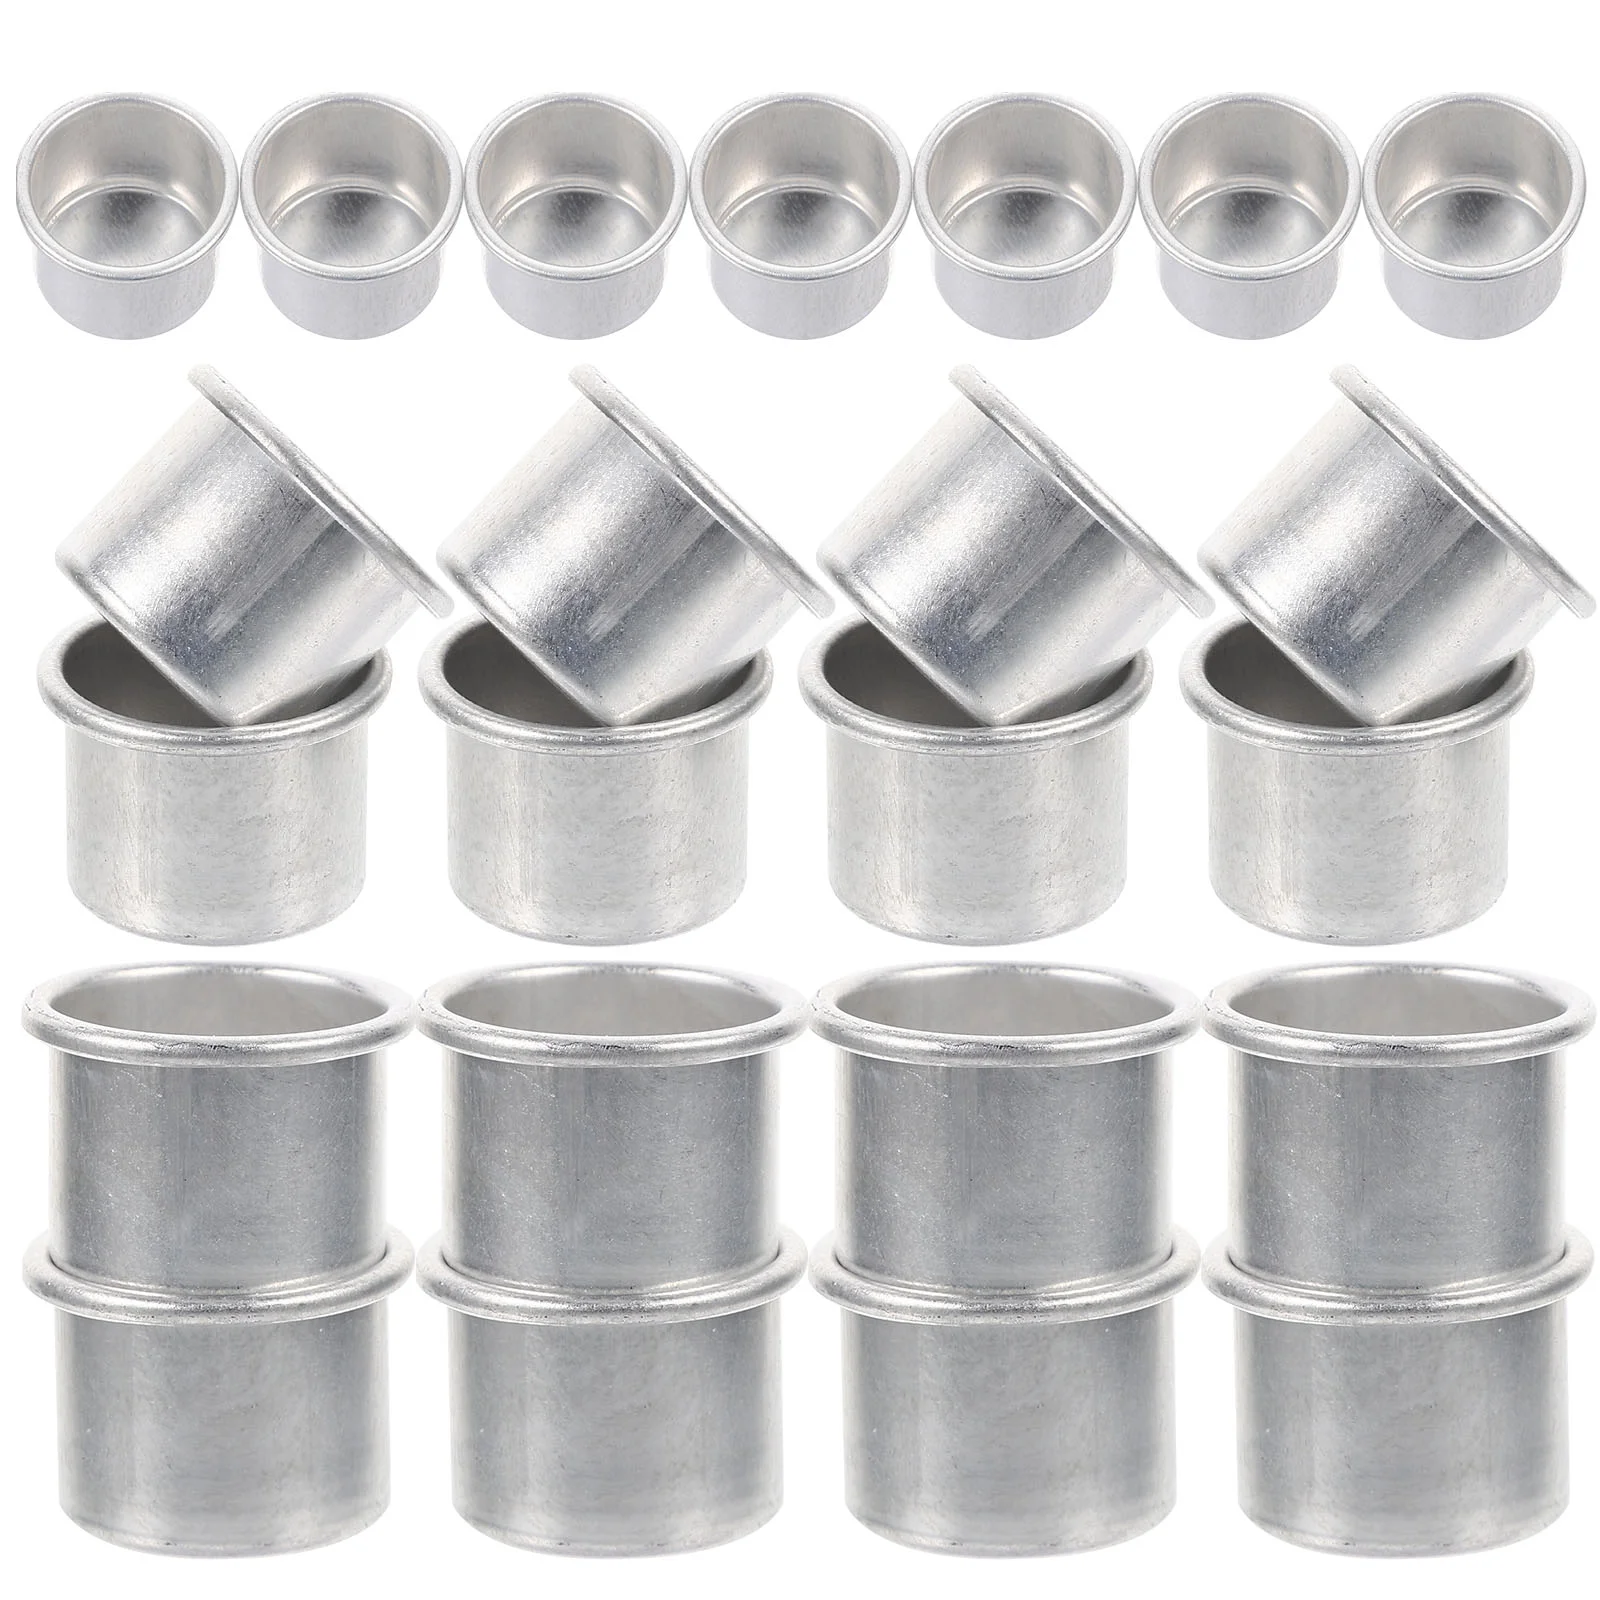 

50 Pcs Aluminium Cups Holders Metal Inserts Drip Catchers Candles Candlestick Cup Metal Cup